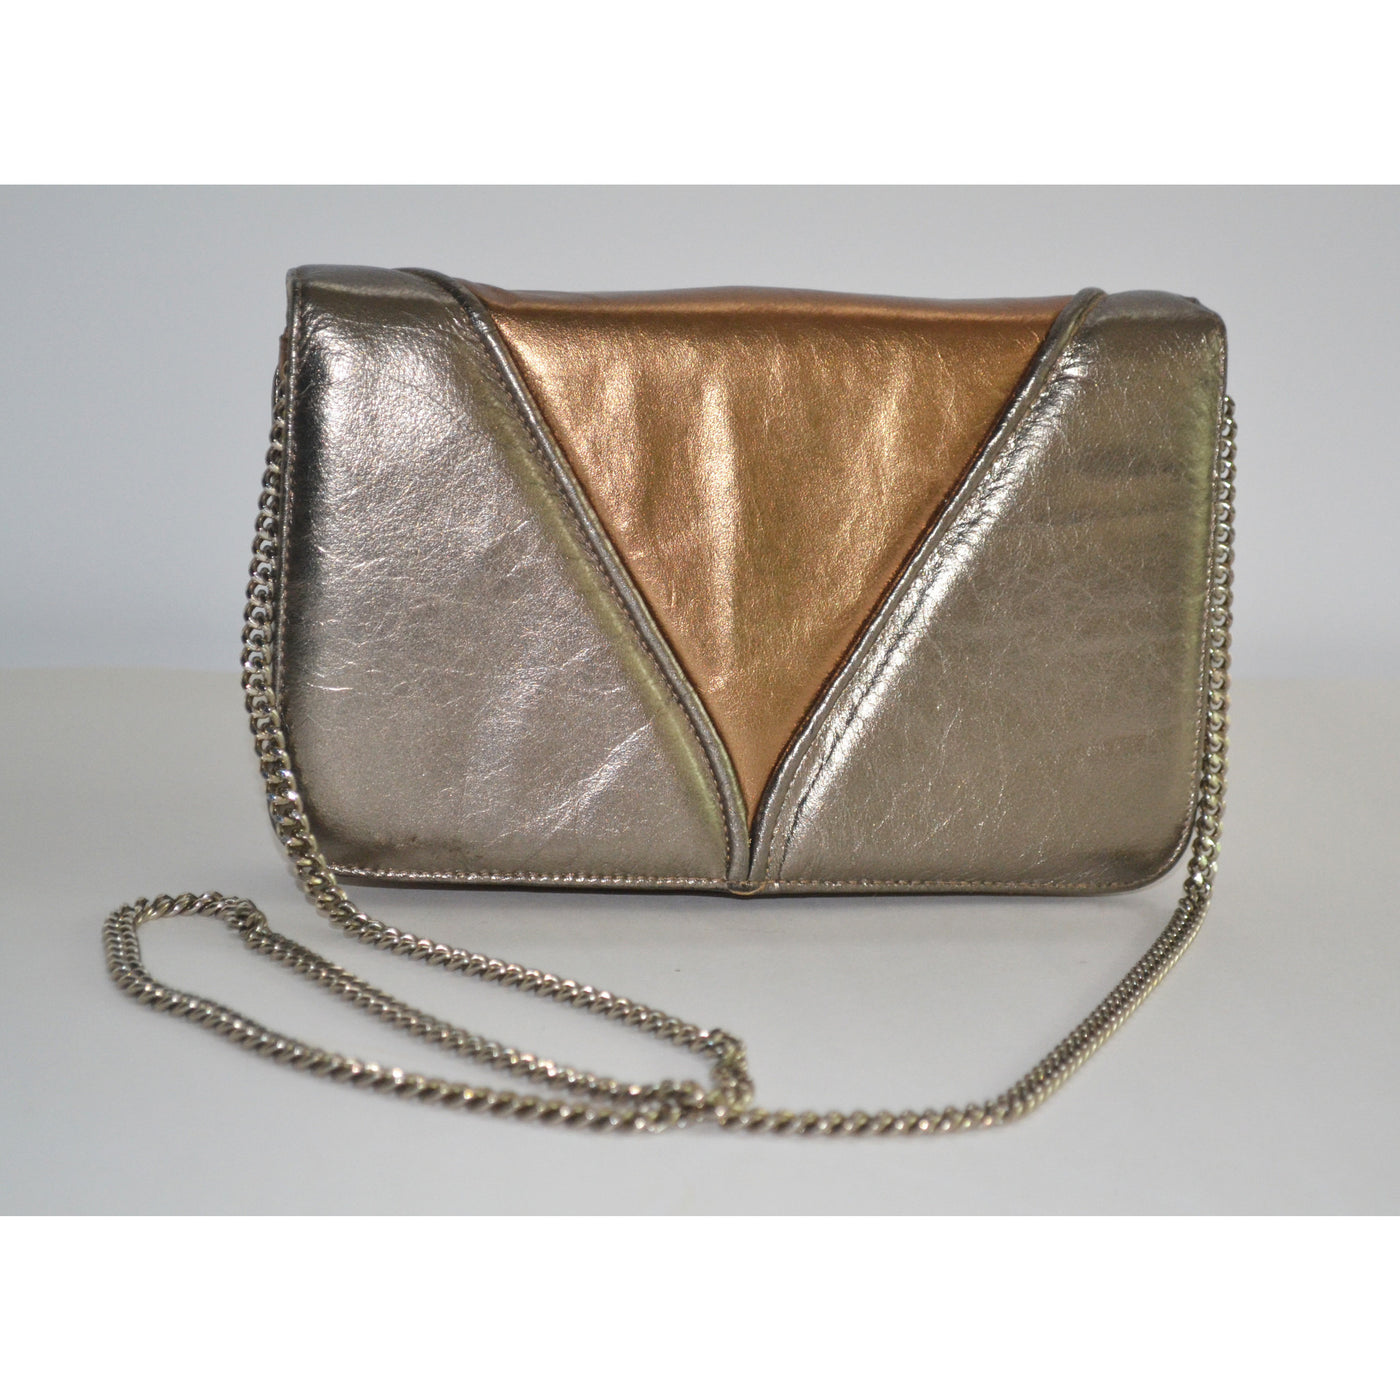 Vintage Gold Metallic Leather Purse By Morle 